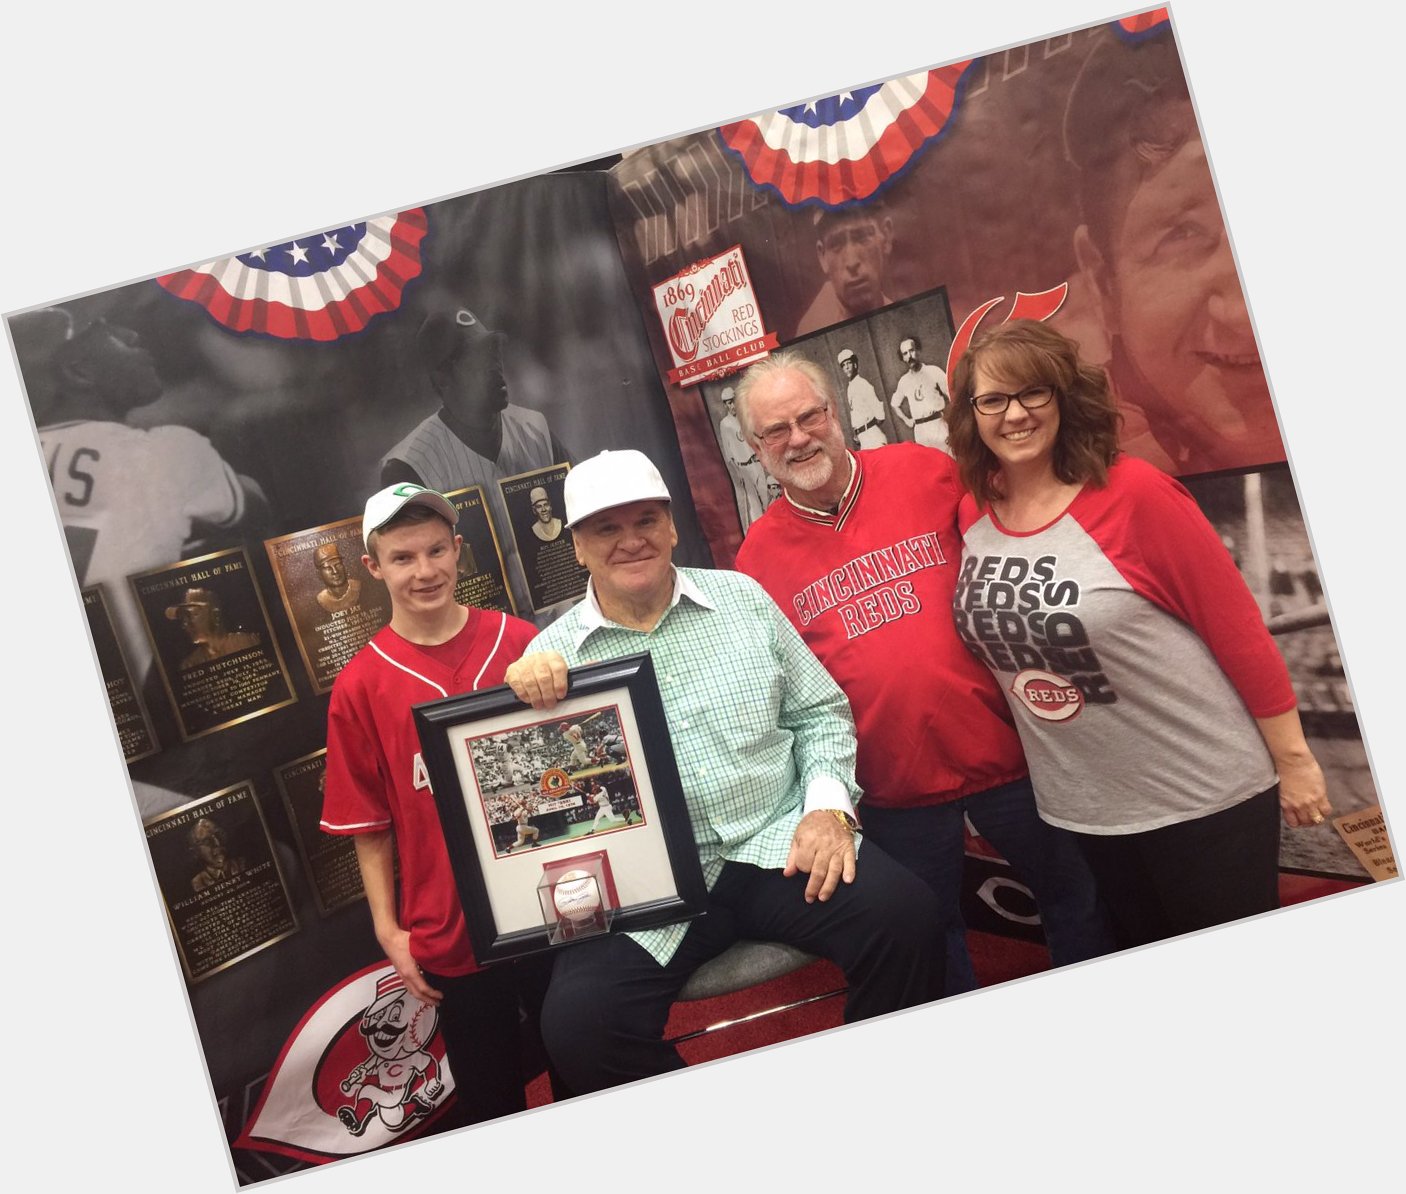 HAPPY BIRTHDAY TO THE HIT KING, PETE ROSE!!!...FROM THE BURKHARDT AND WAGNER FAMILIES IN SOUTH WEBSTER OHIO... 